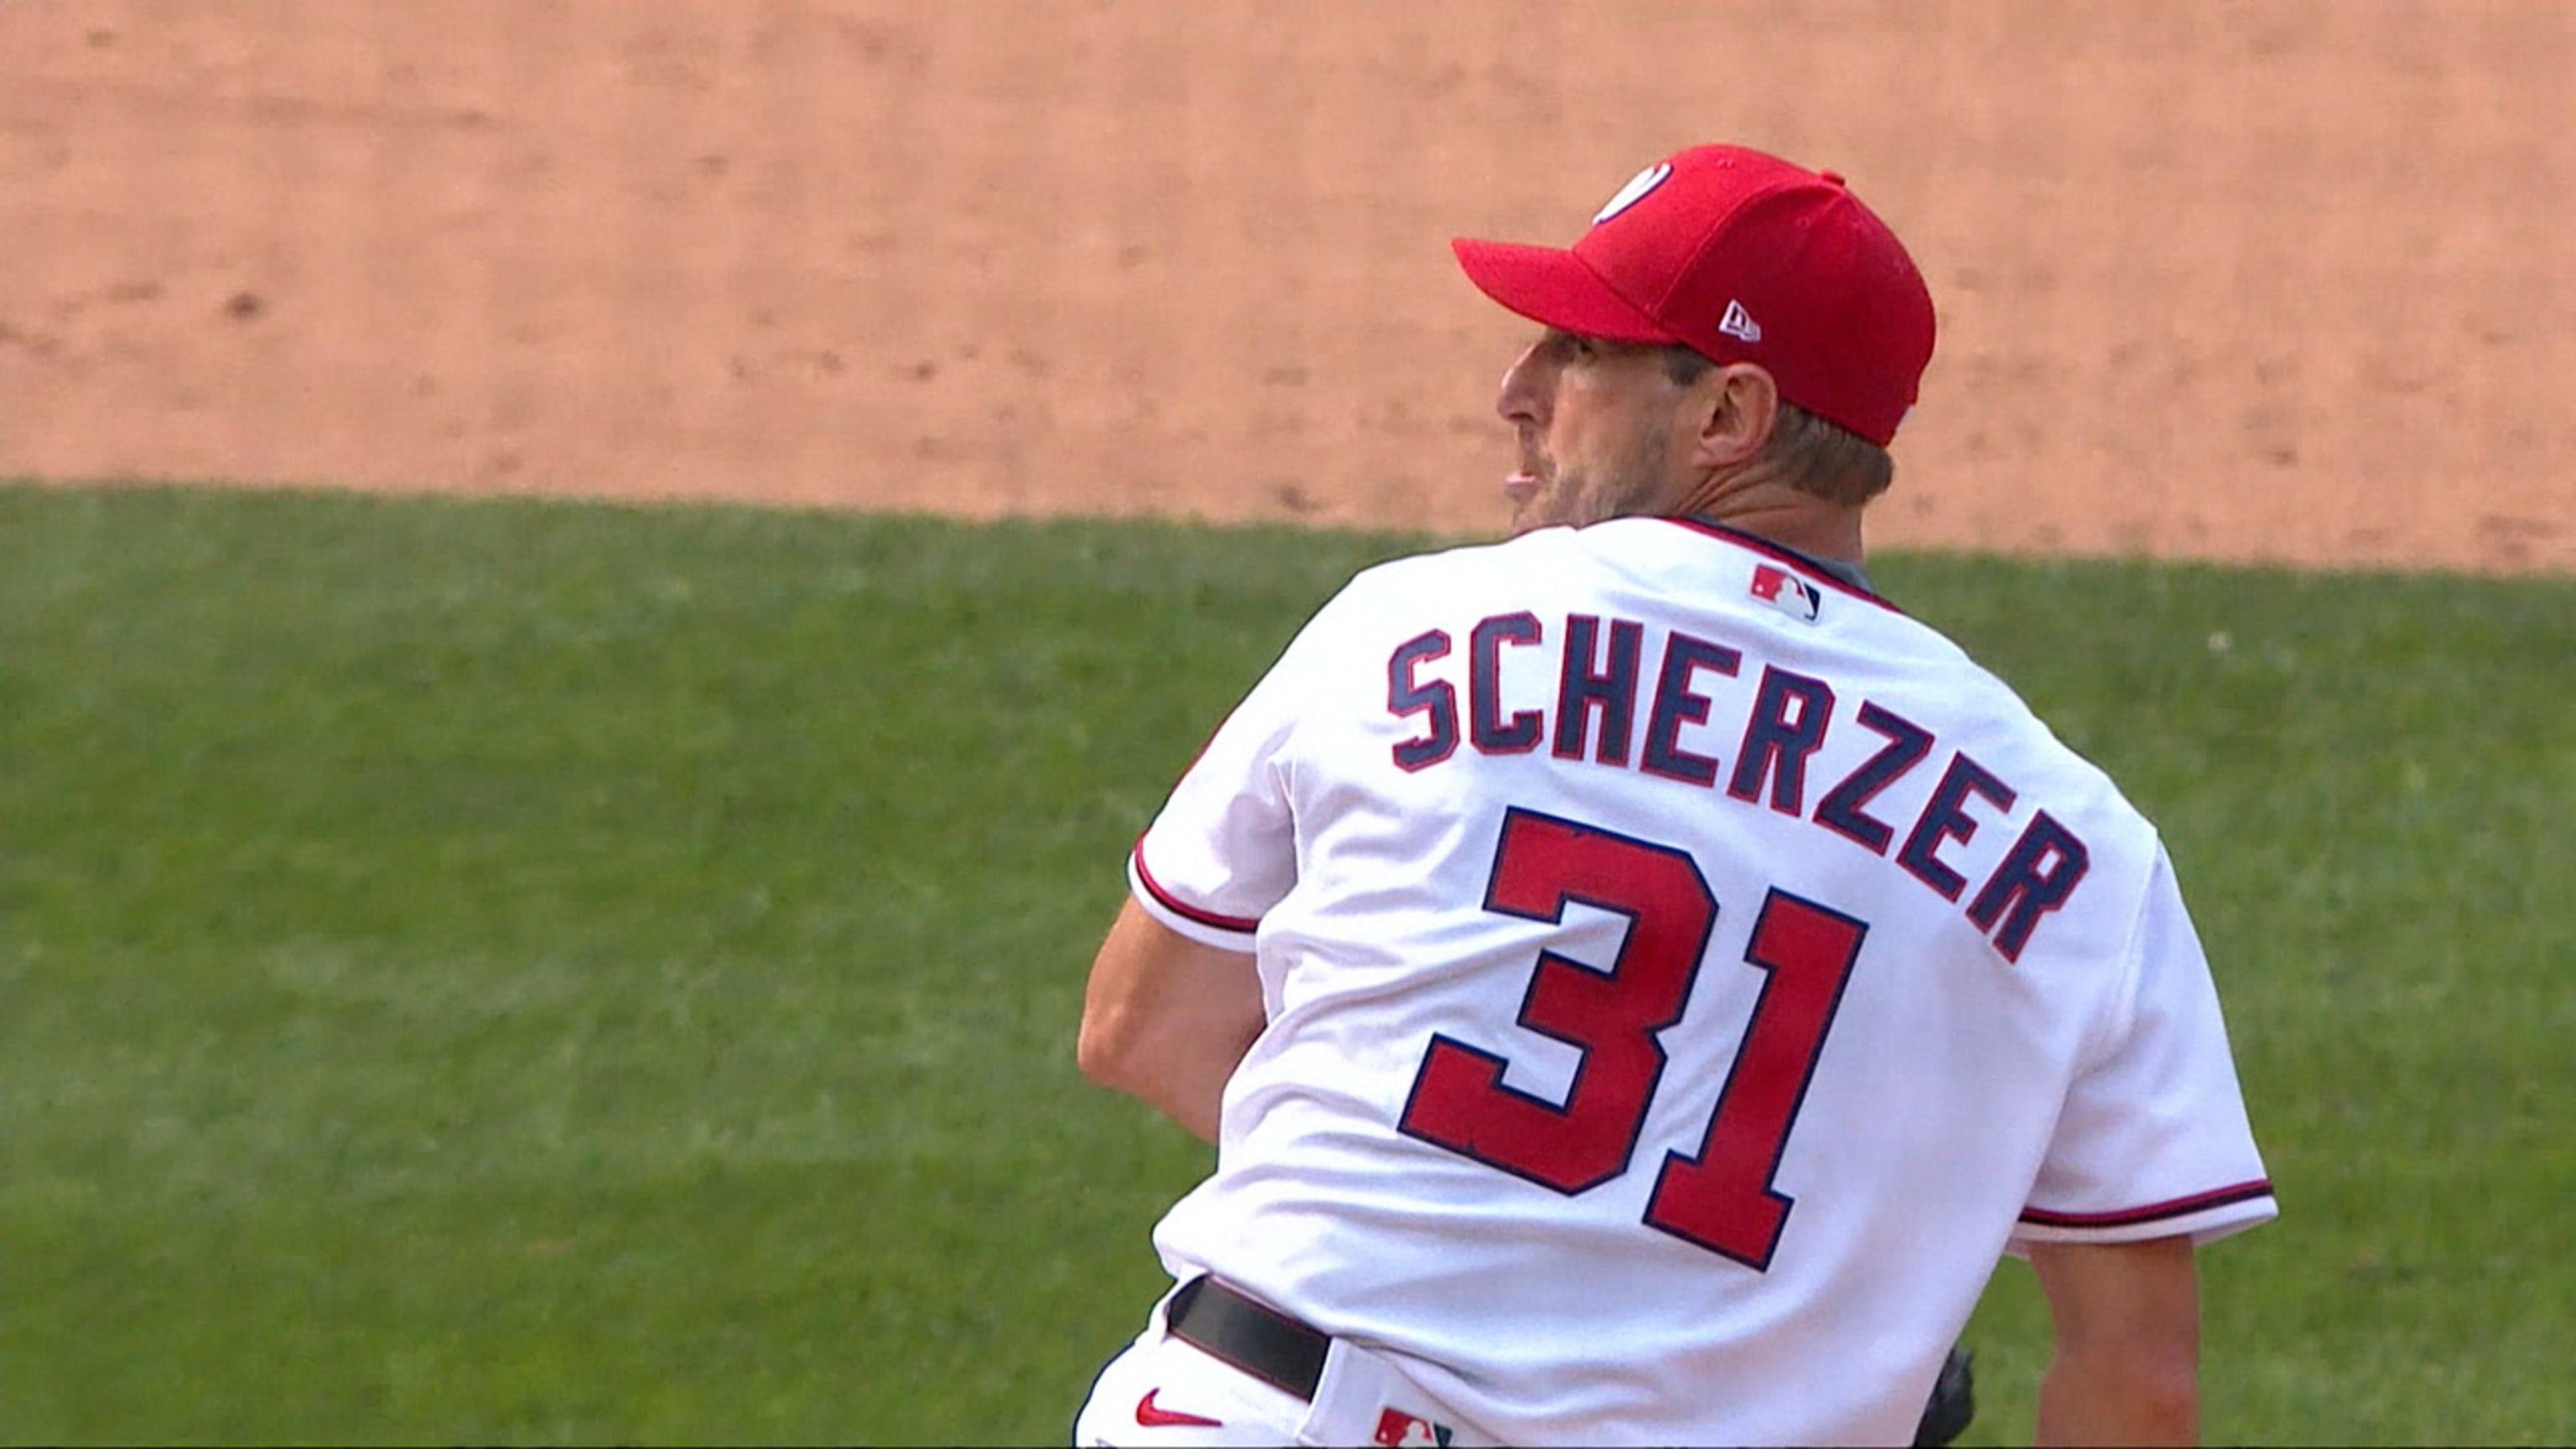 What Nationals Max Scherzer has meant to fans over 5 seasons